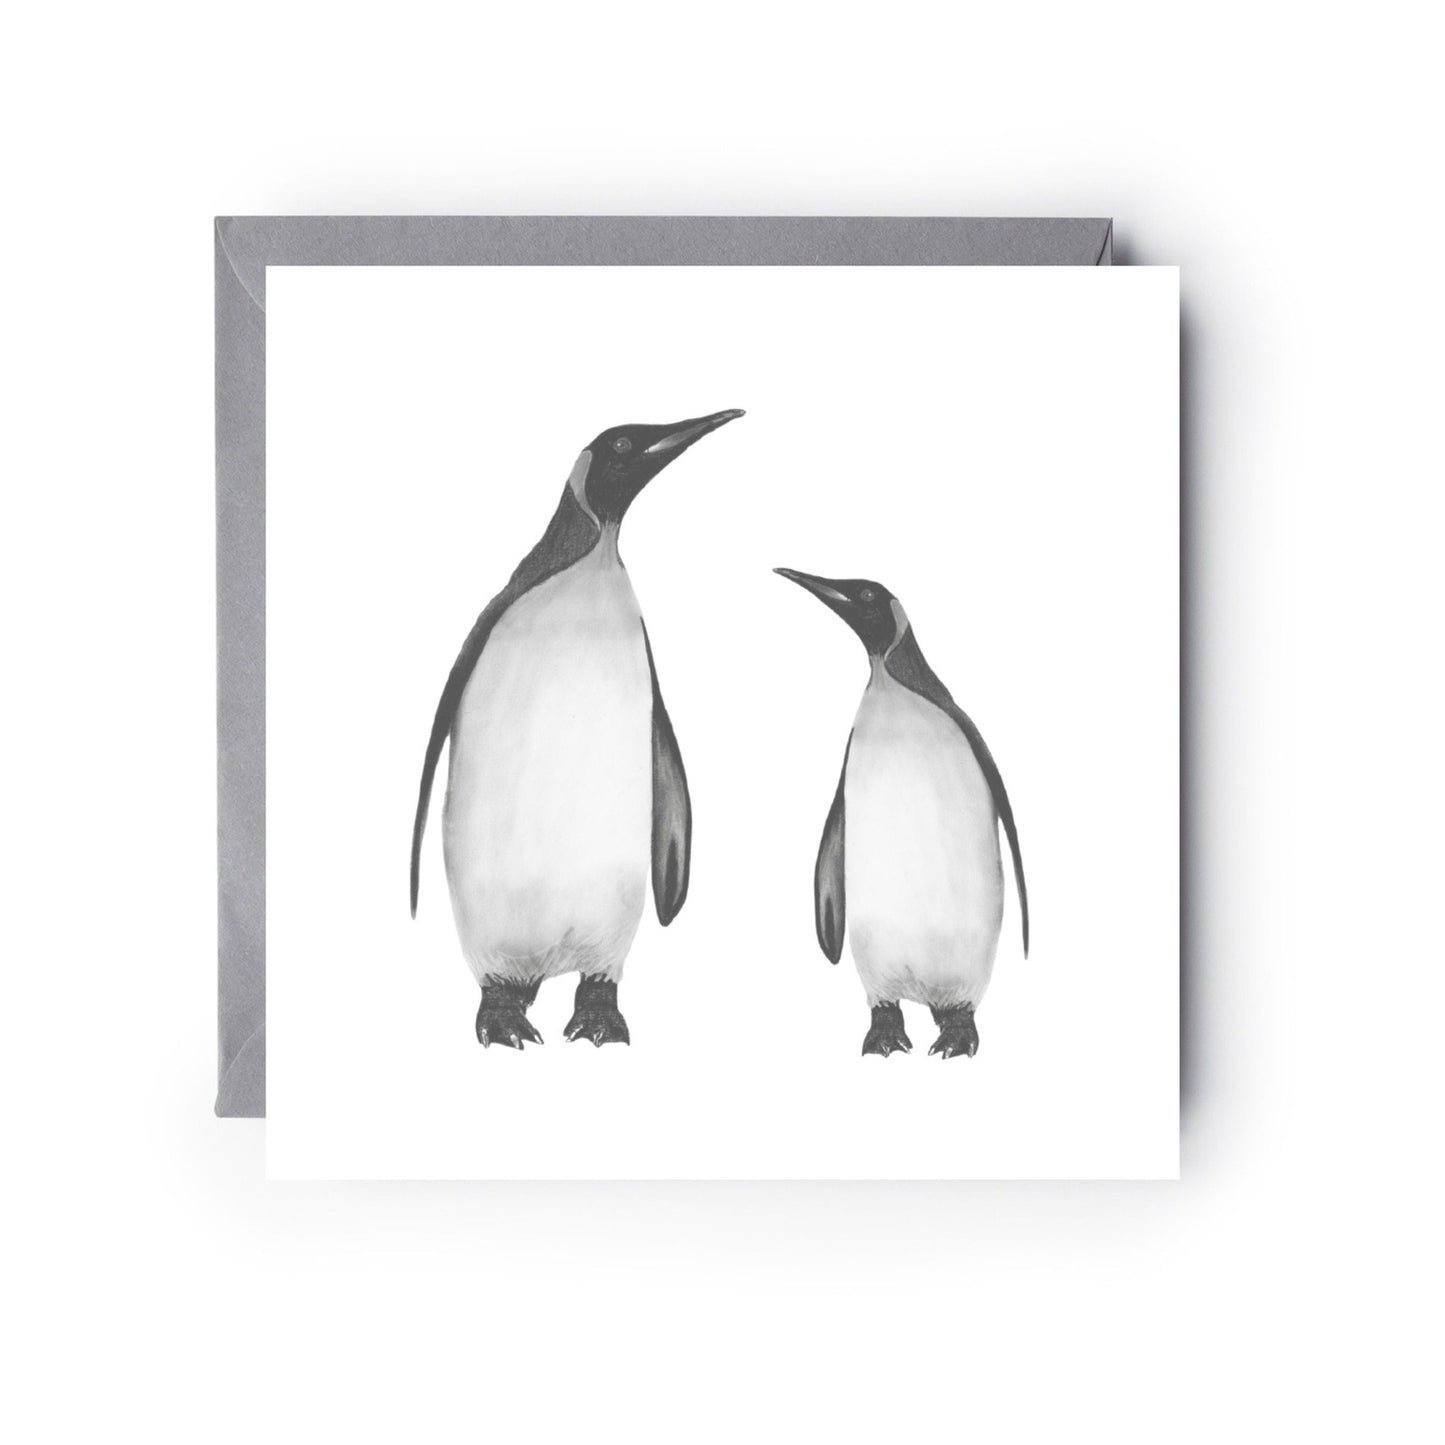 A Penguin Greeting Card from Libra Fine Arts